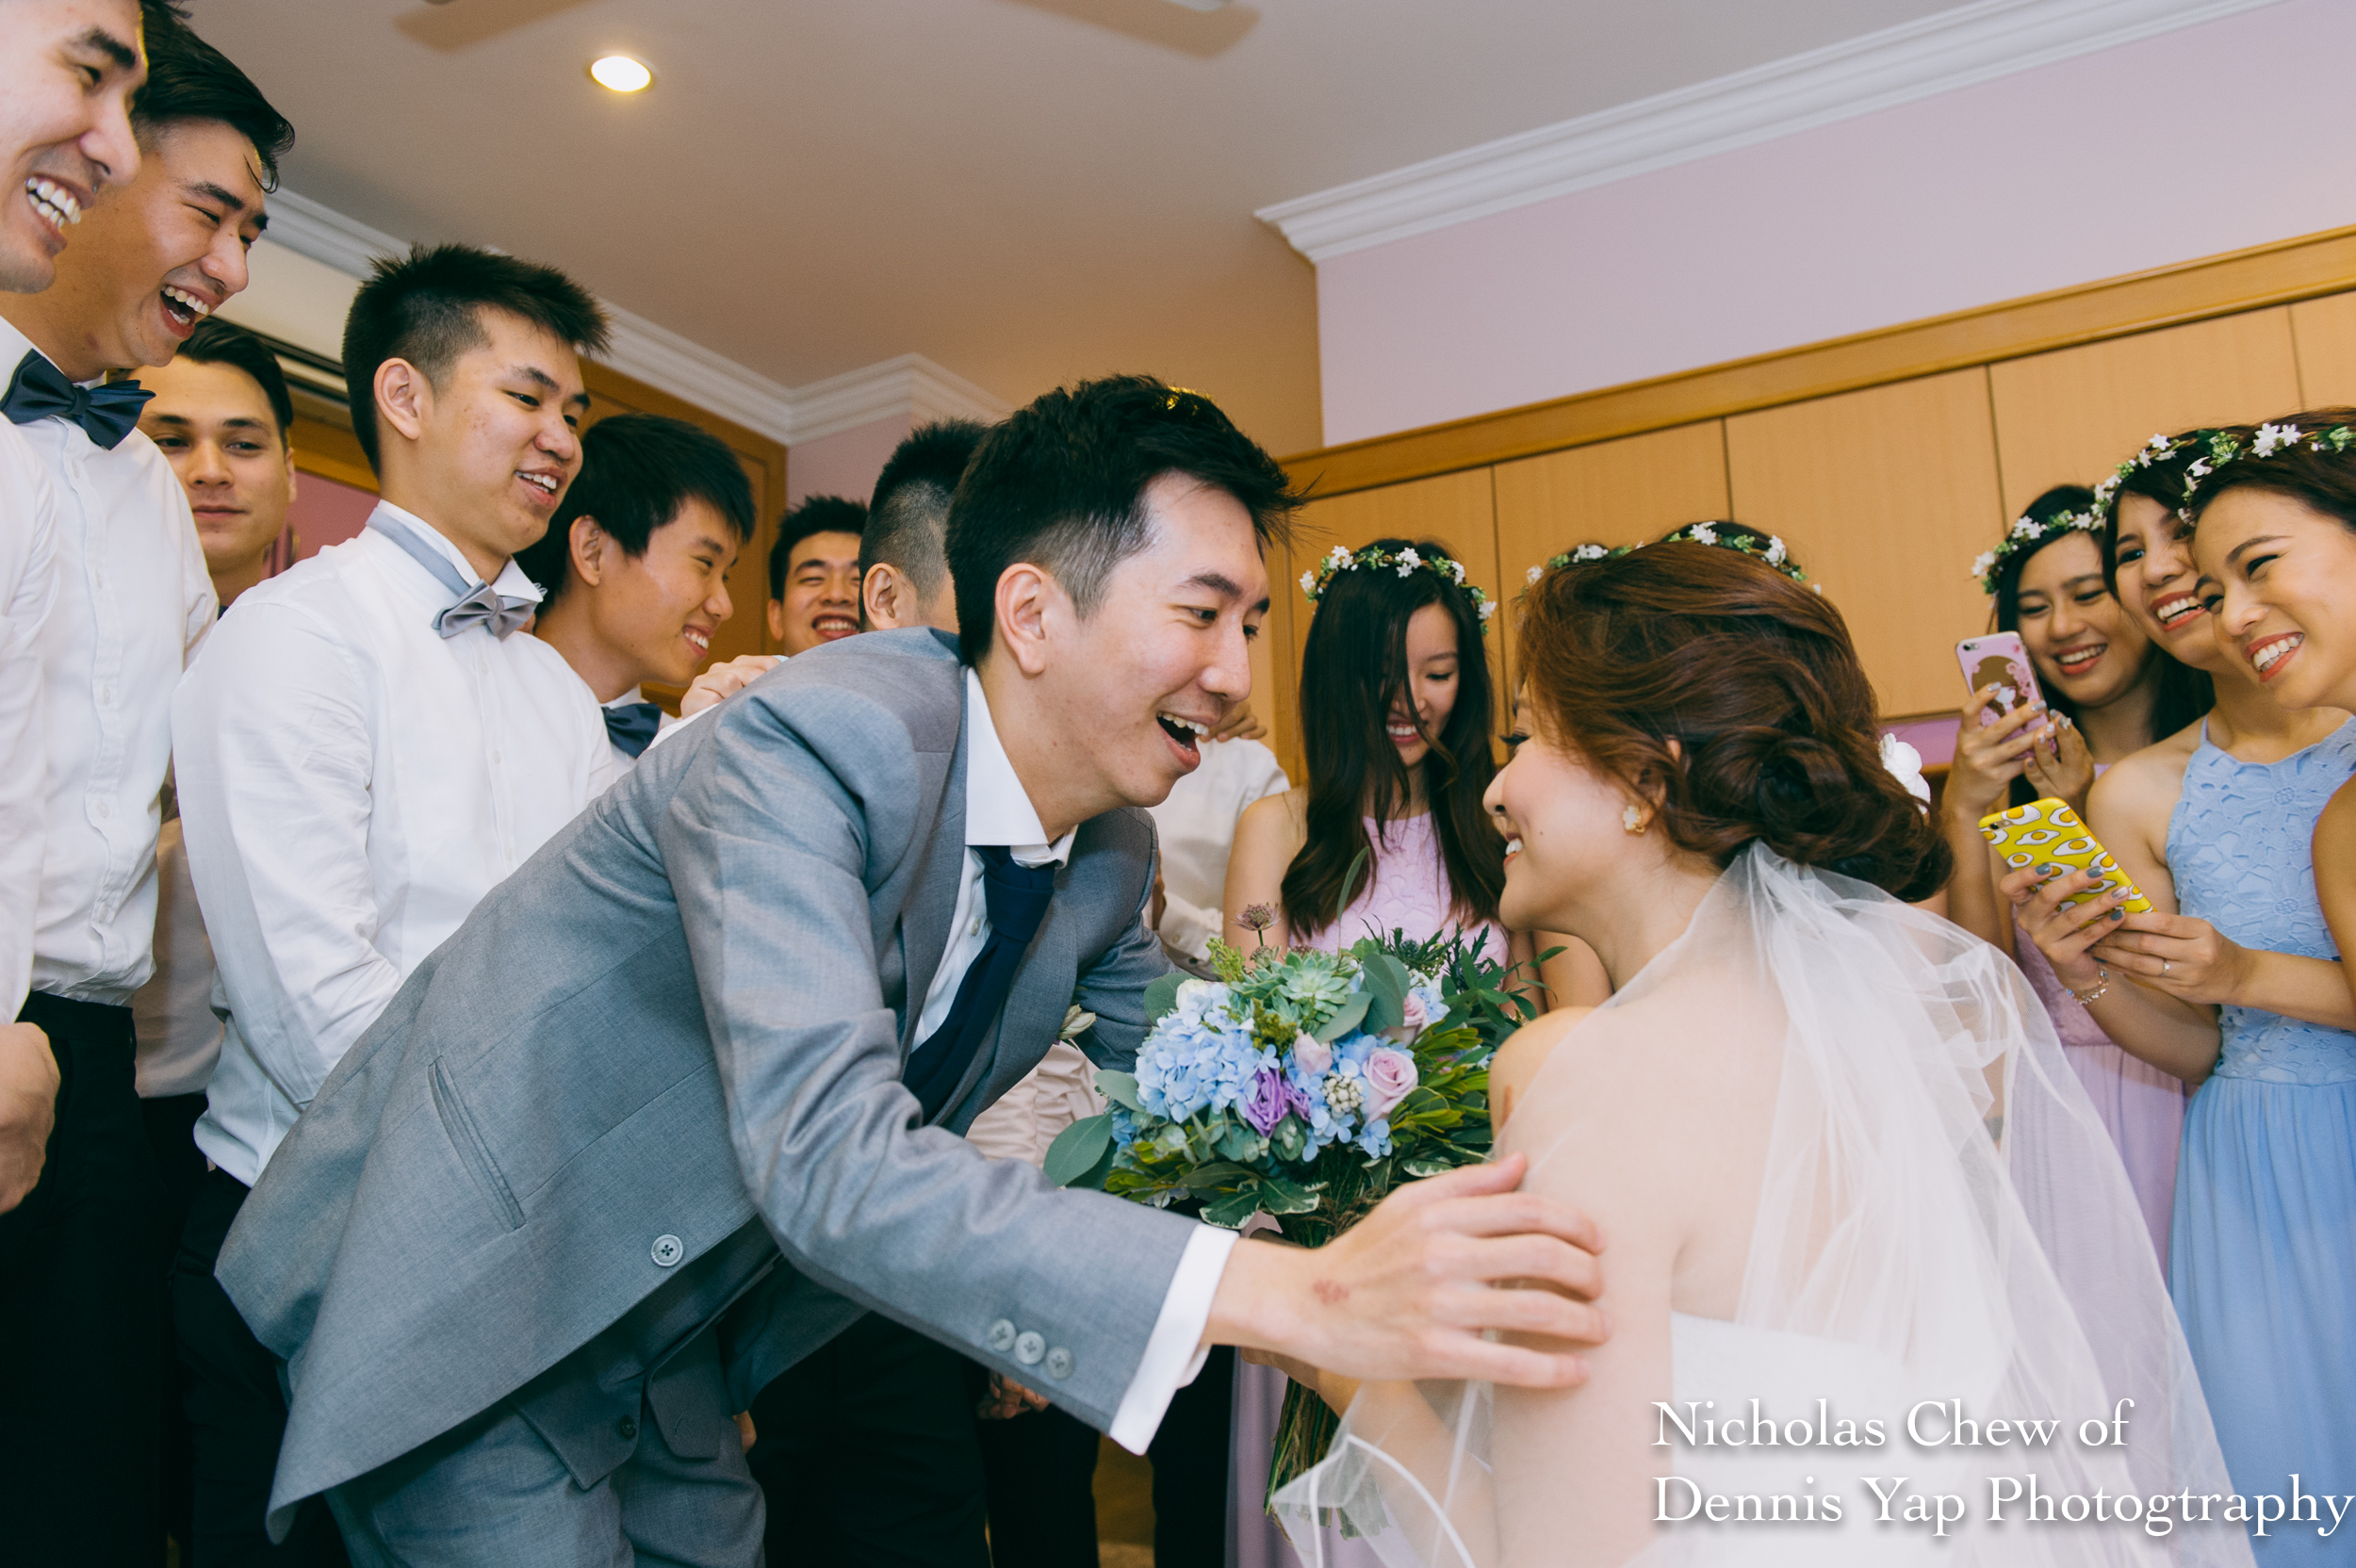 Nicholas Chew profile wedding natural candid moments chinese traditional church garden of dennis yap photography004Nicholas Profile-4.jpg